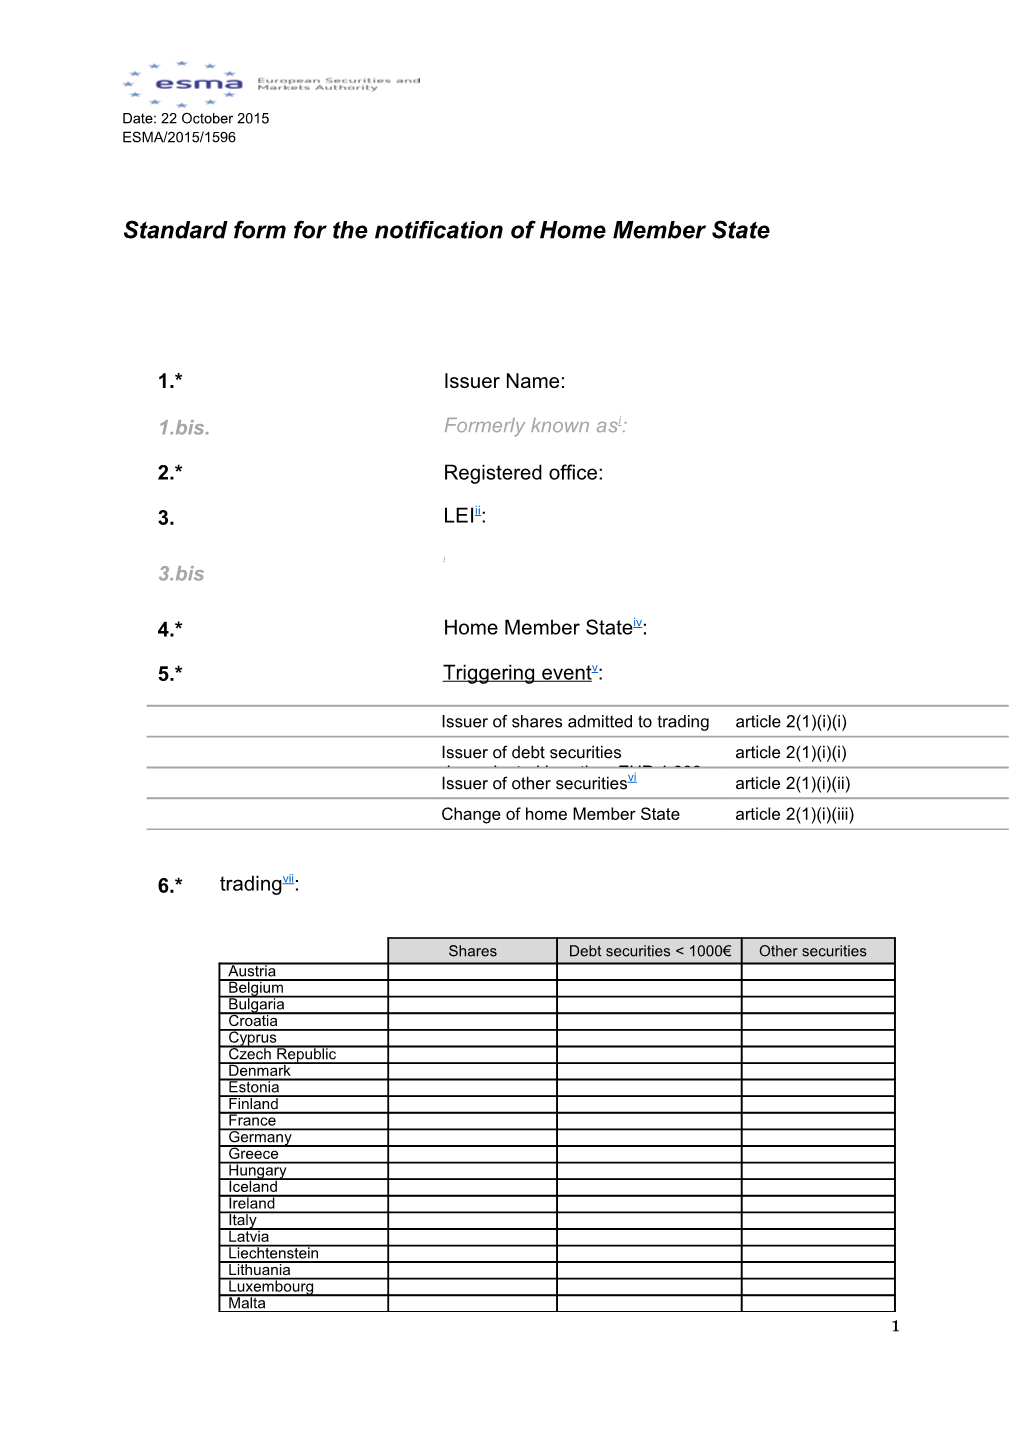 Standard Form for the Notification of Home Member State